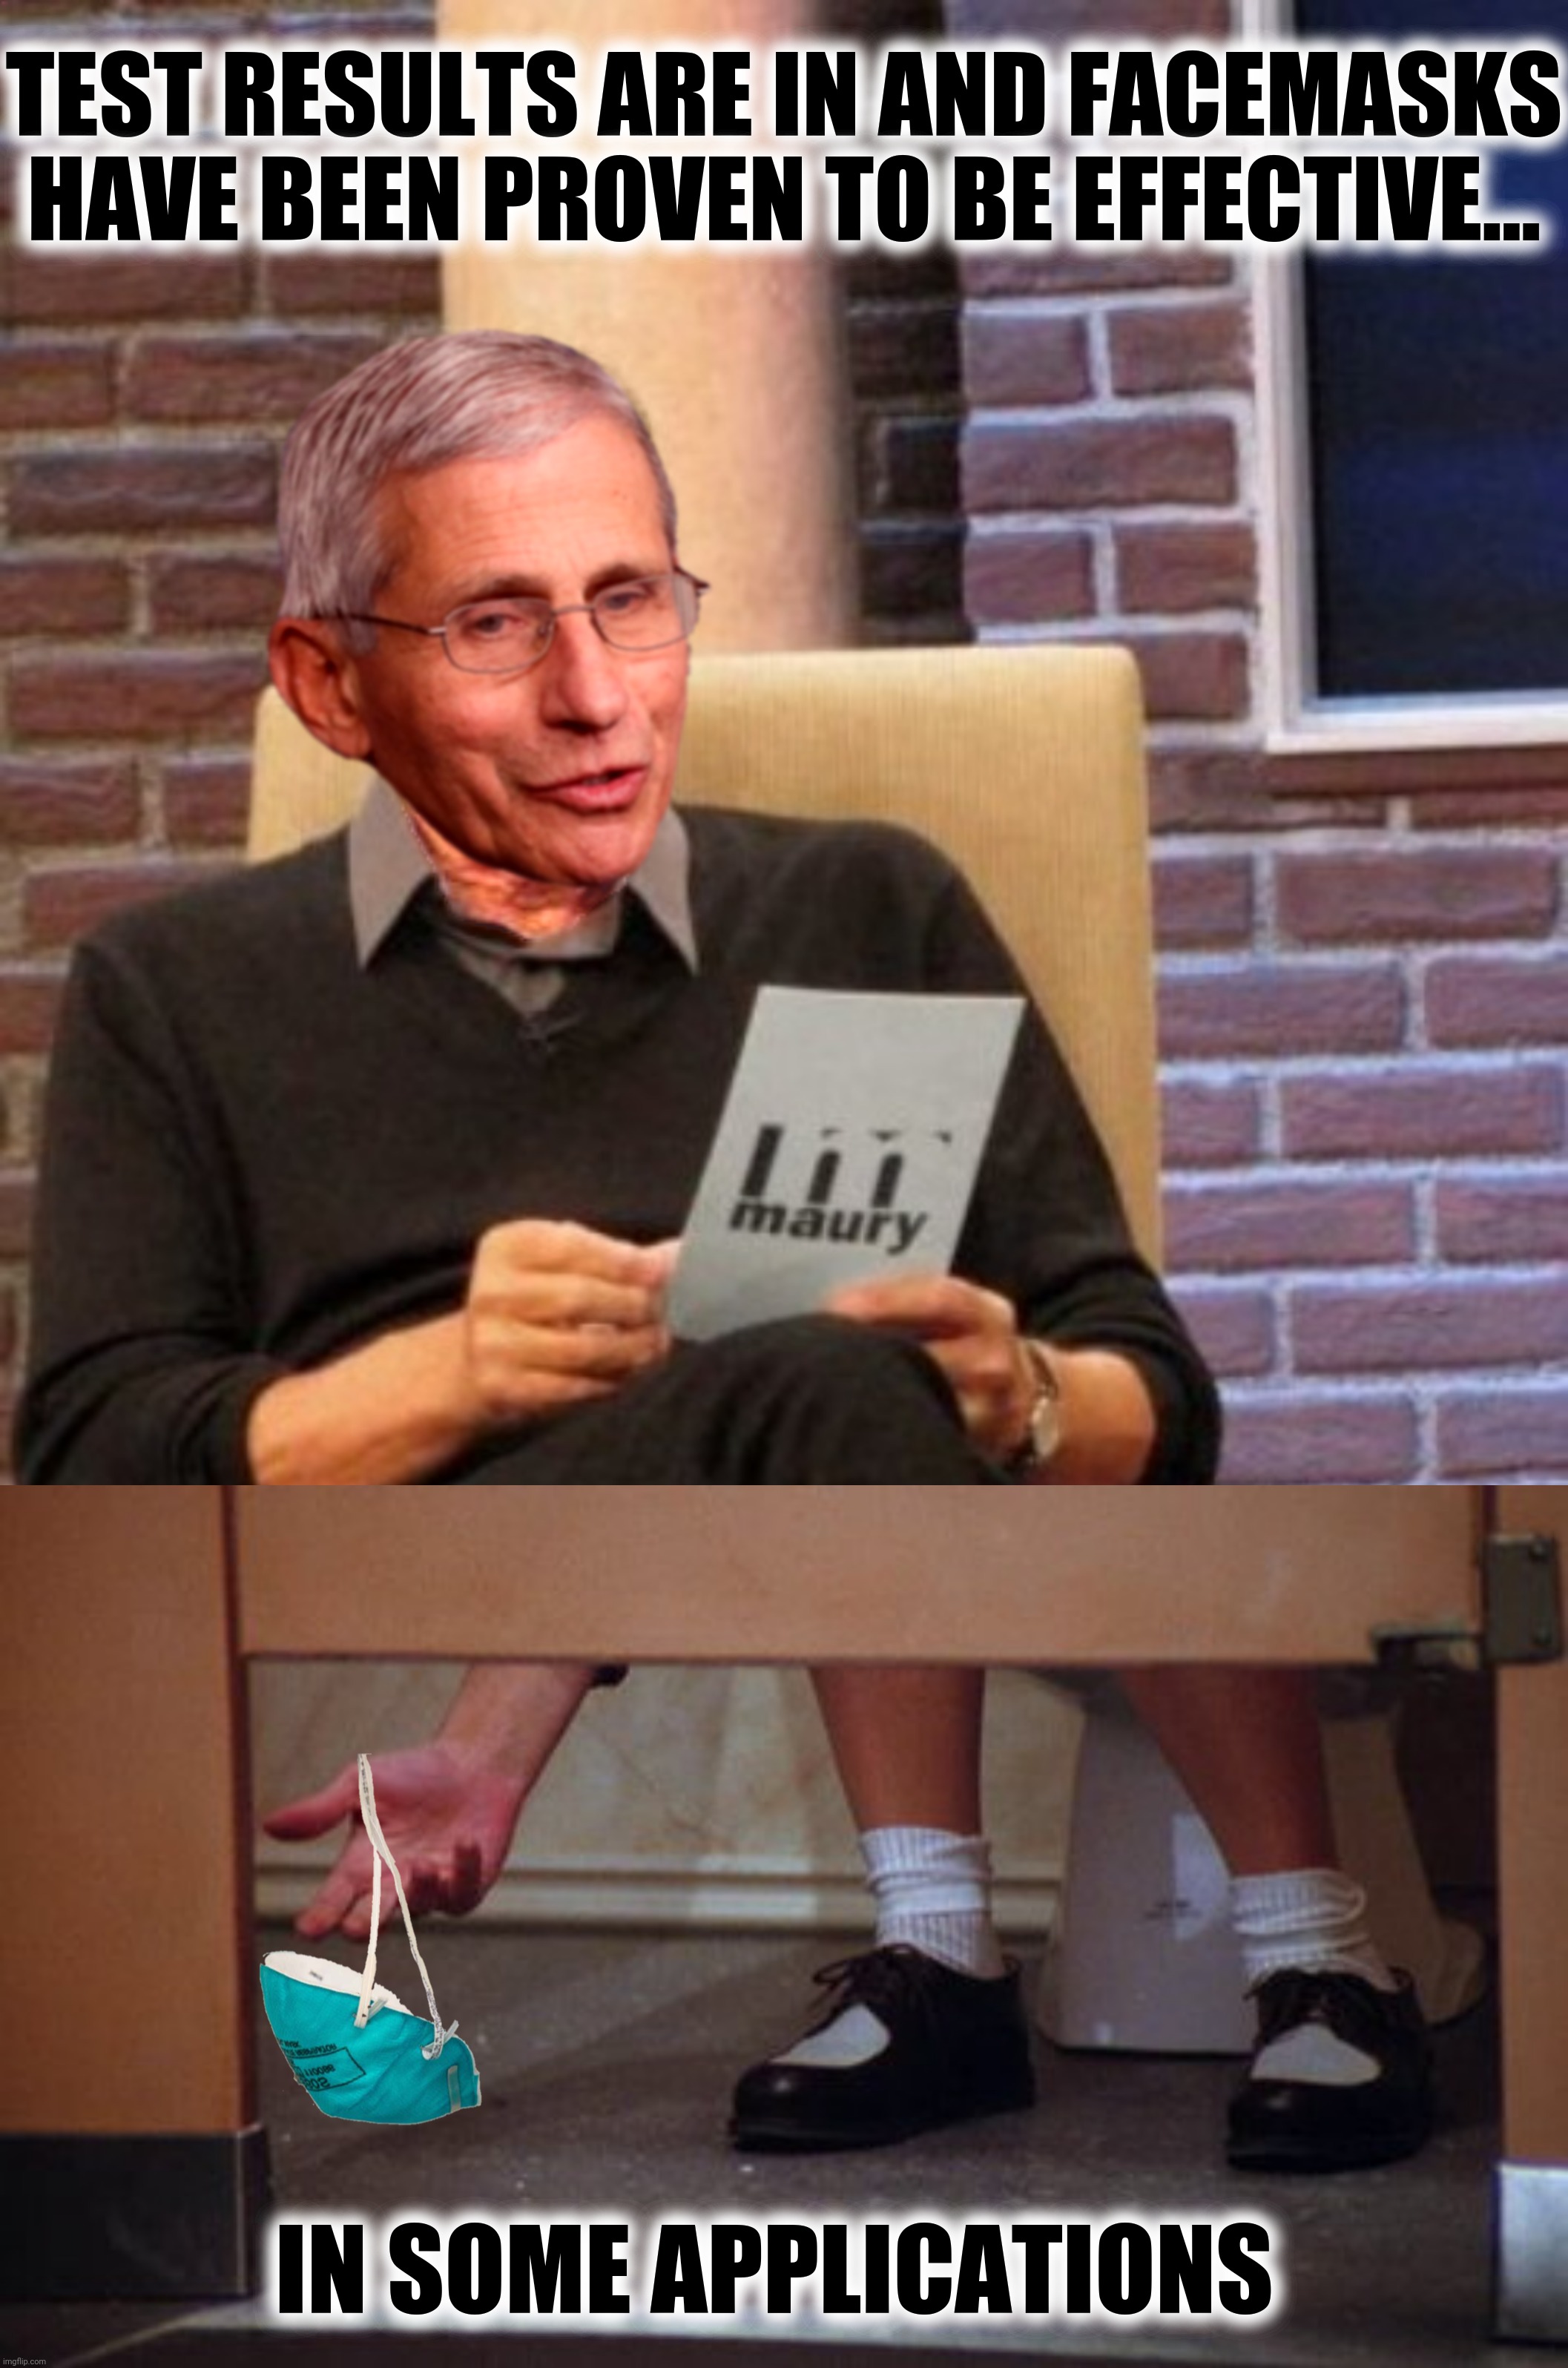 Bad Photoshop Sunday presents:  Science and data | TEST RESULTS ARE IN AND FACEMASKS HAVE BEEN PROVEN TO BE EFFECTIVE... IN SOME APPLICATIONS | image tagged in bad photoshop,anthony fauci,maury povich,facemasks,a square to spare,toilet paper | made w/ Imgflip meme maker